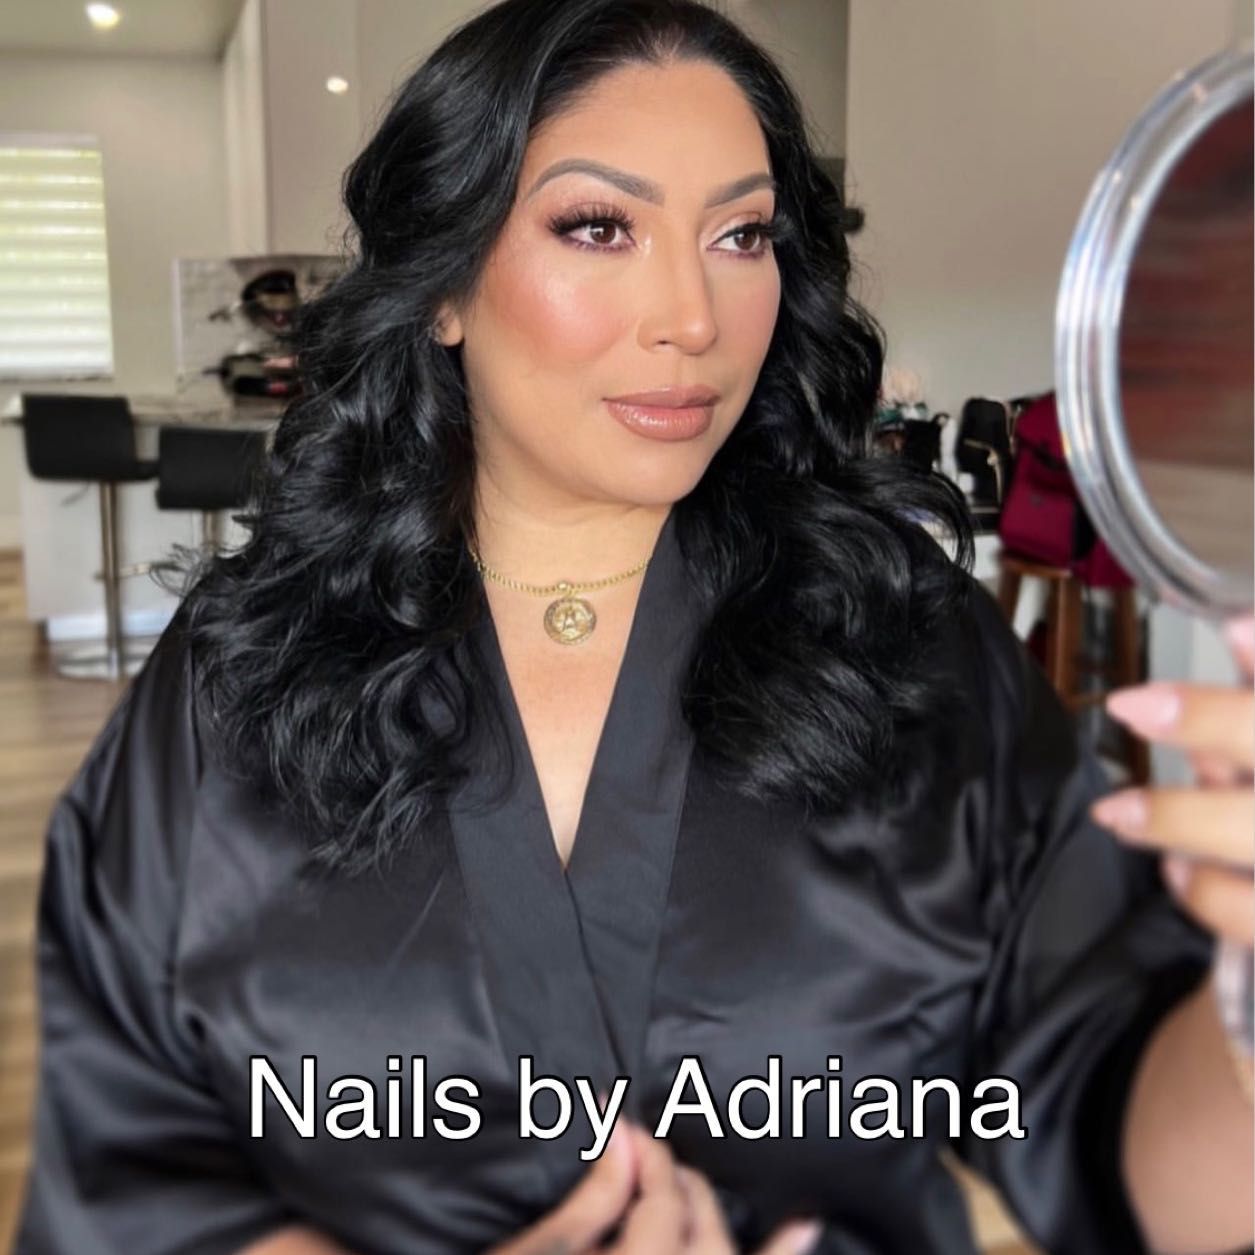 Nails by Adriana, 9580 NW 41st St doral fl, Doral, 33178